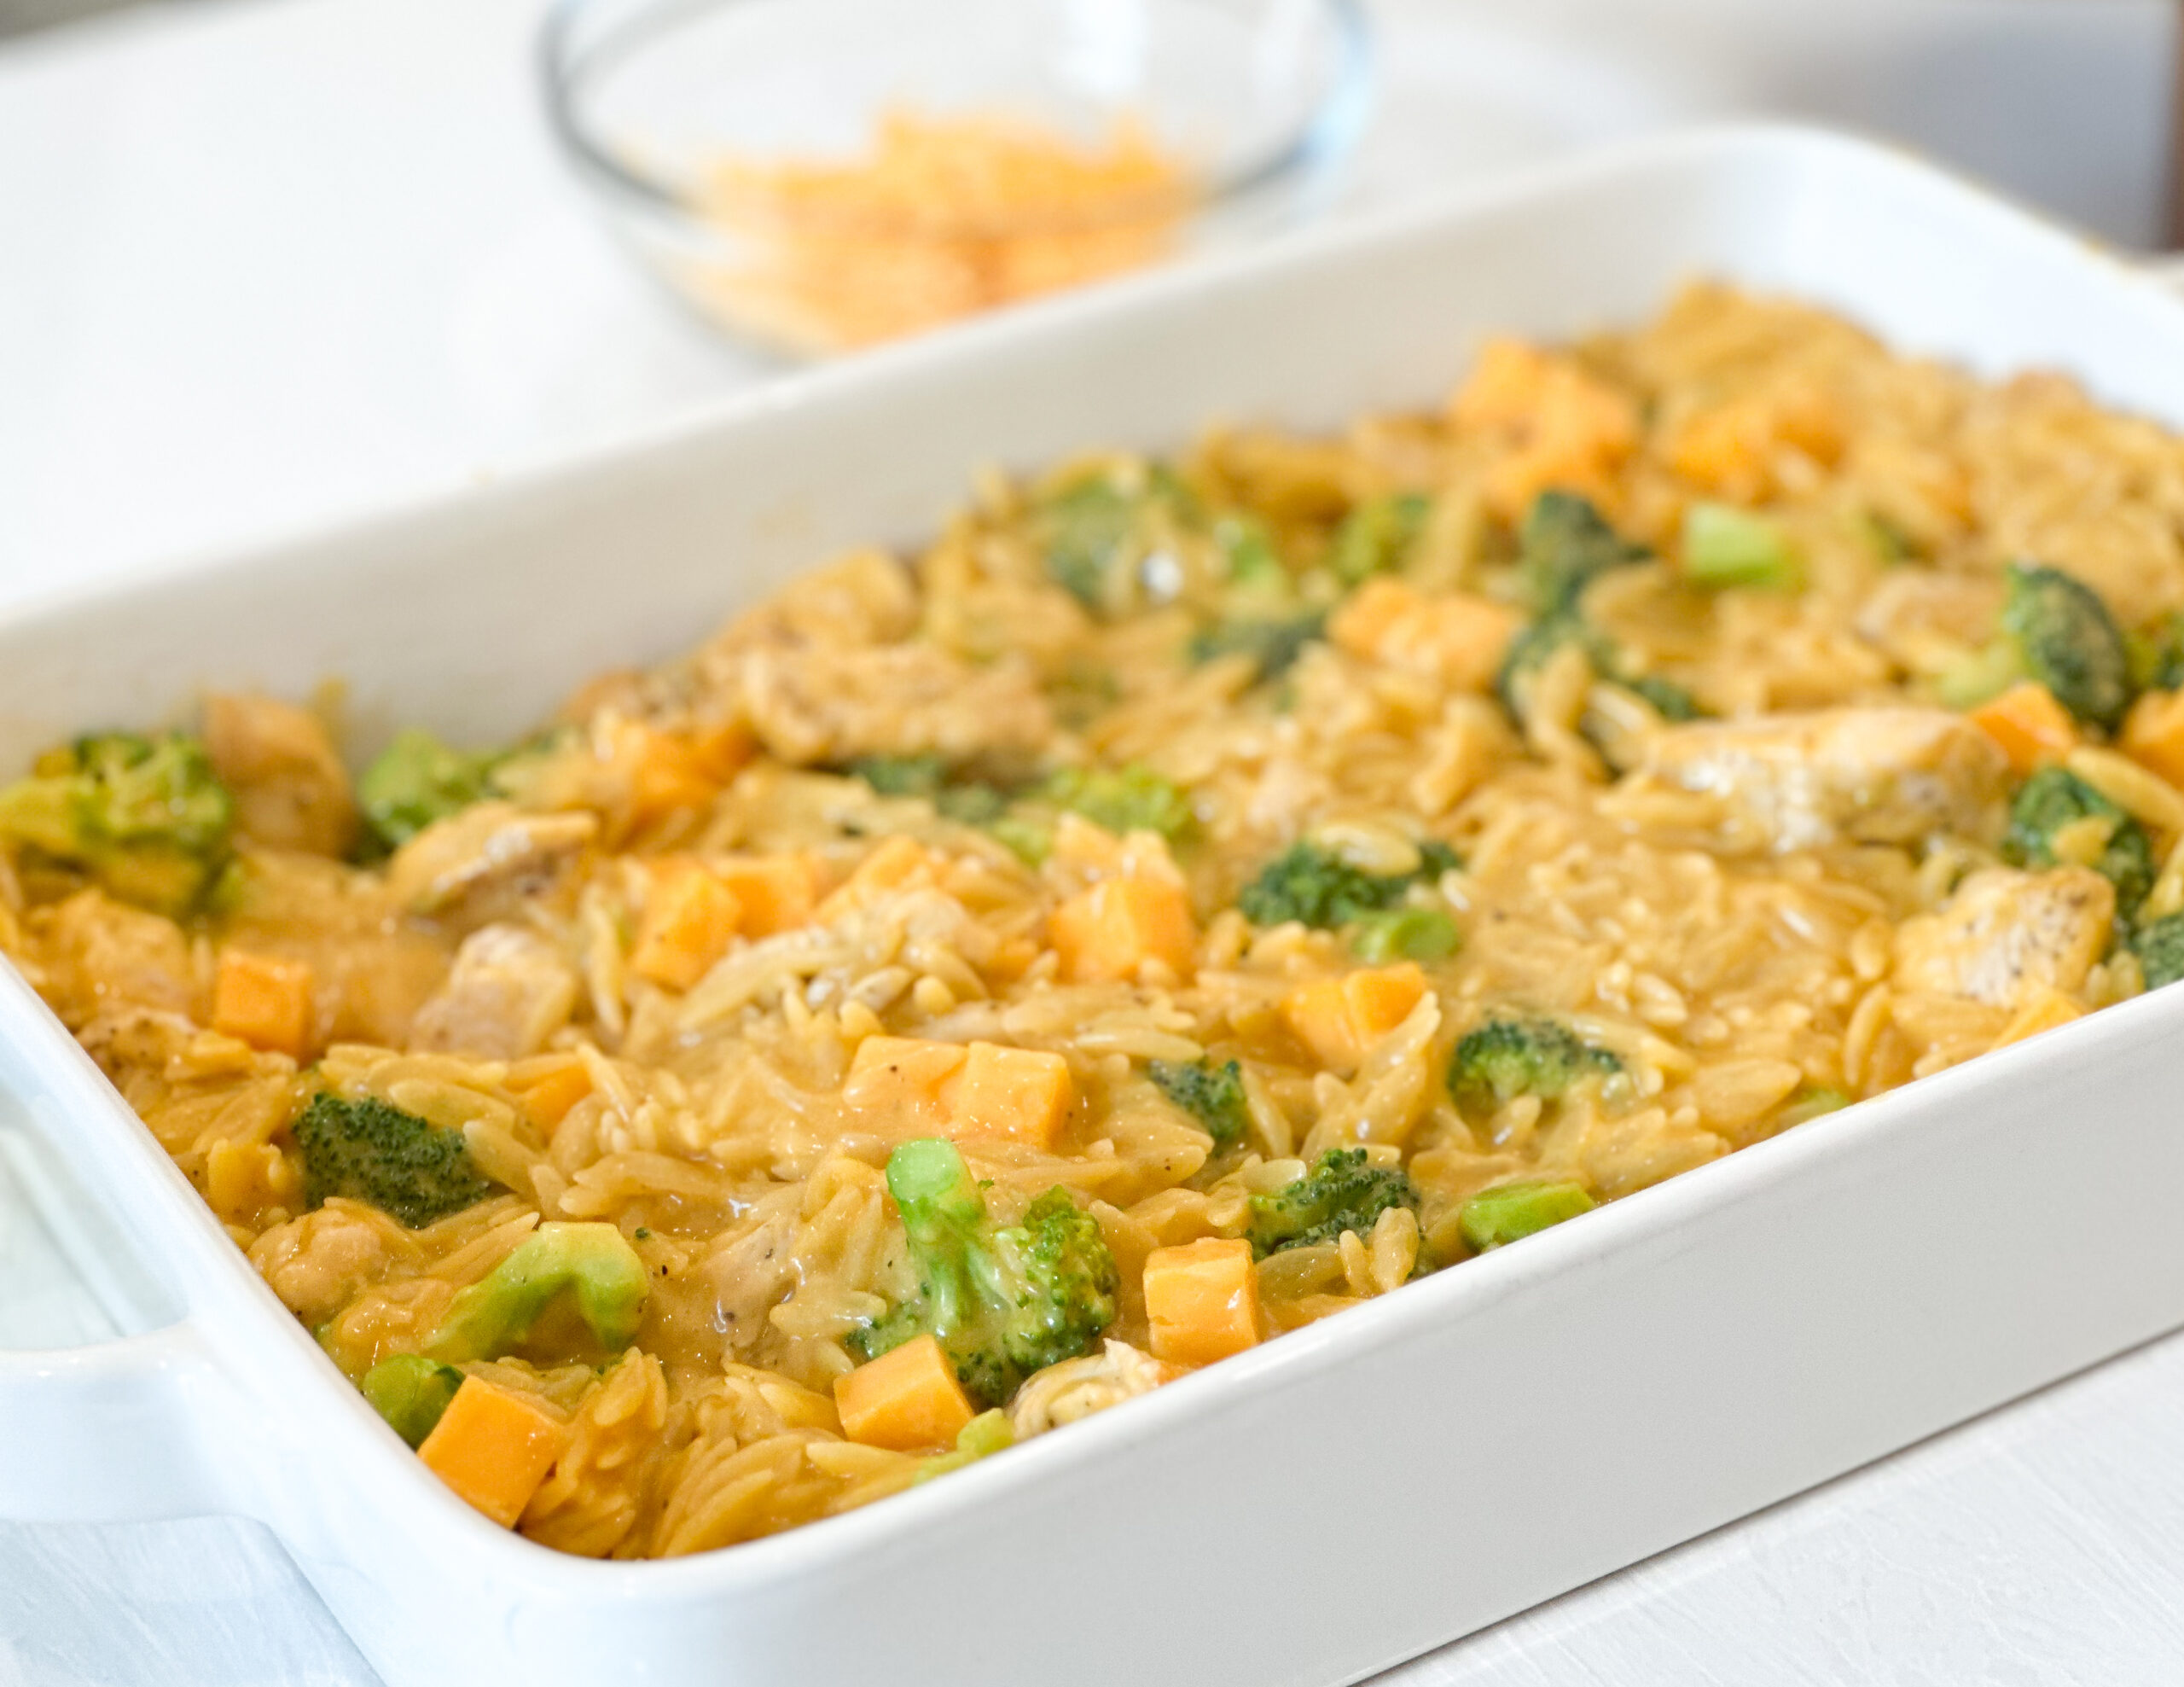 orzo in baking dish with cheddar cheese cubes